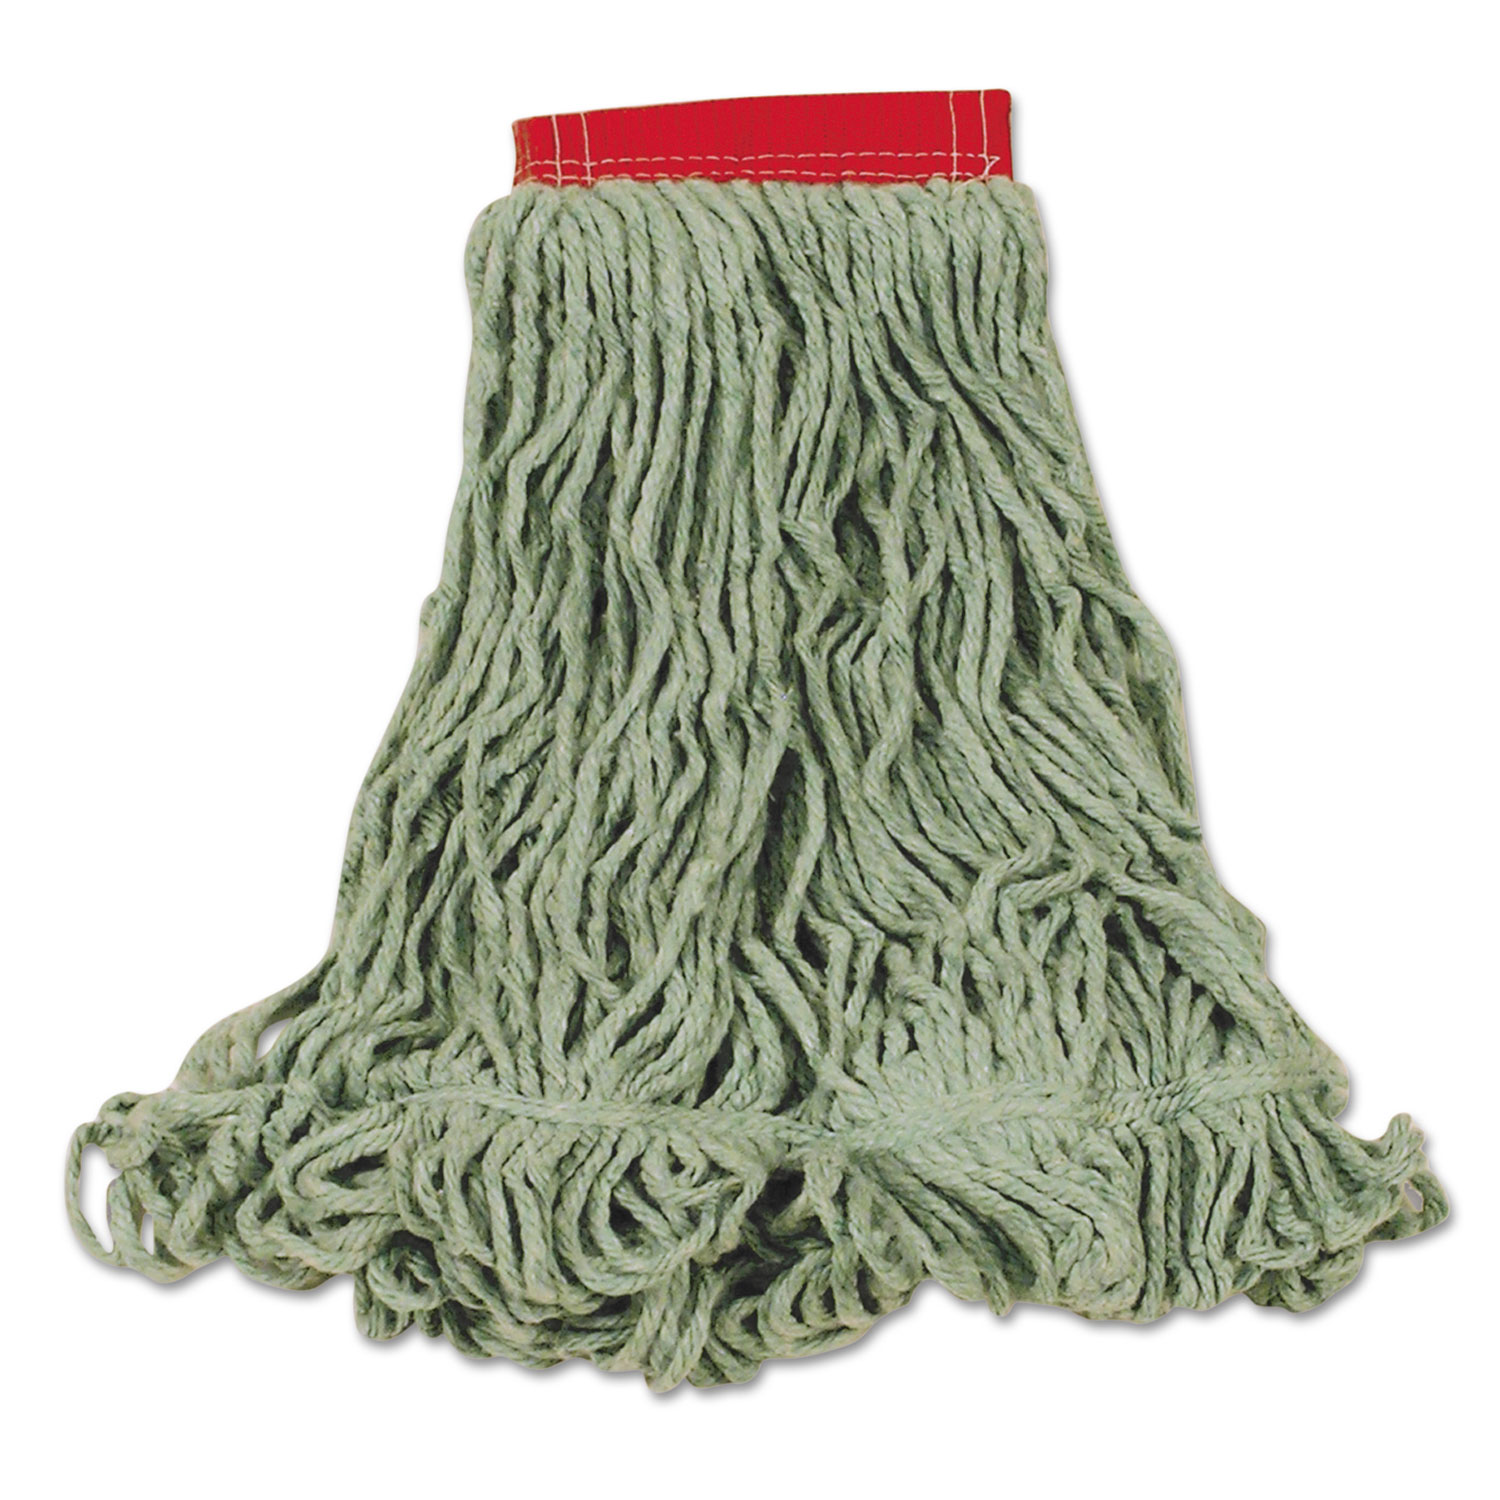  Rubbermaid Commercial FGD25306GR00 Super Stitch Blend Mop Heads, Cotton/Synthetic, Green, Large (RCPD253GRE) 